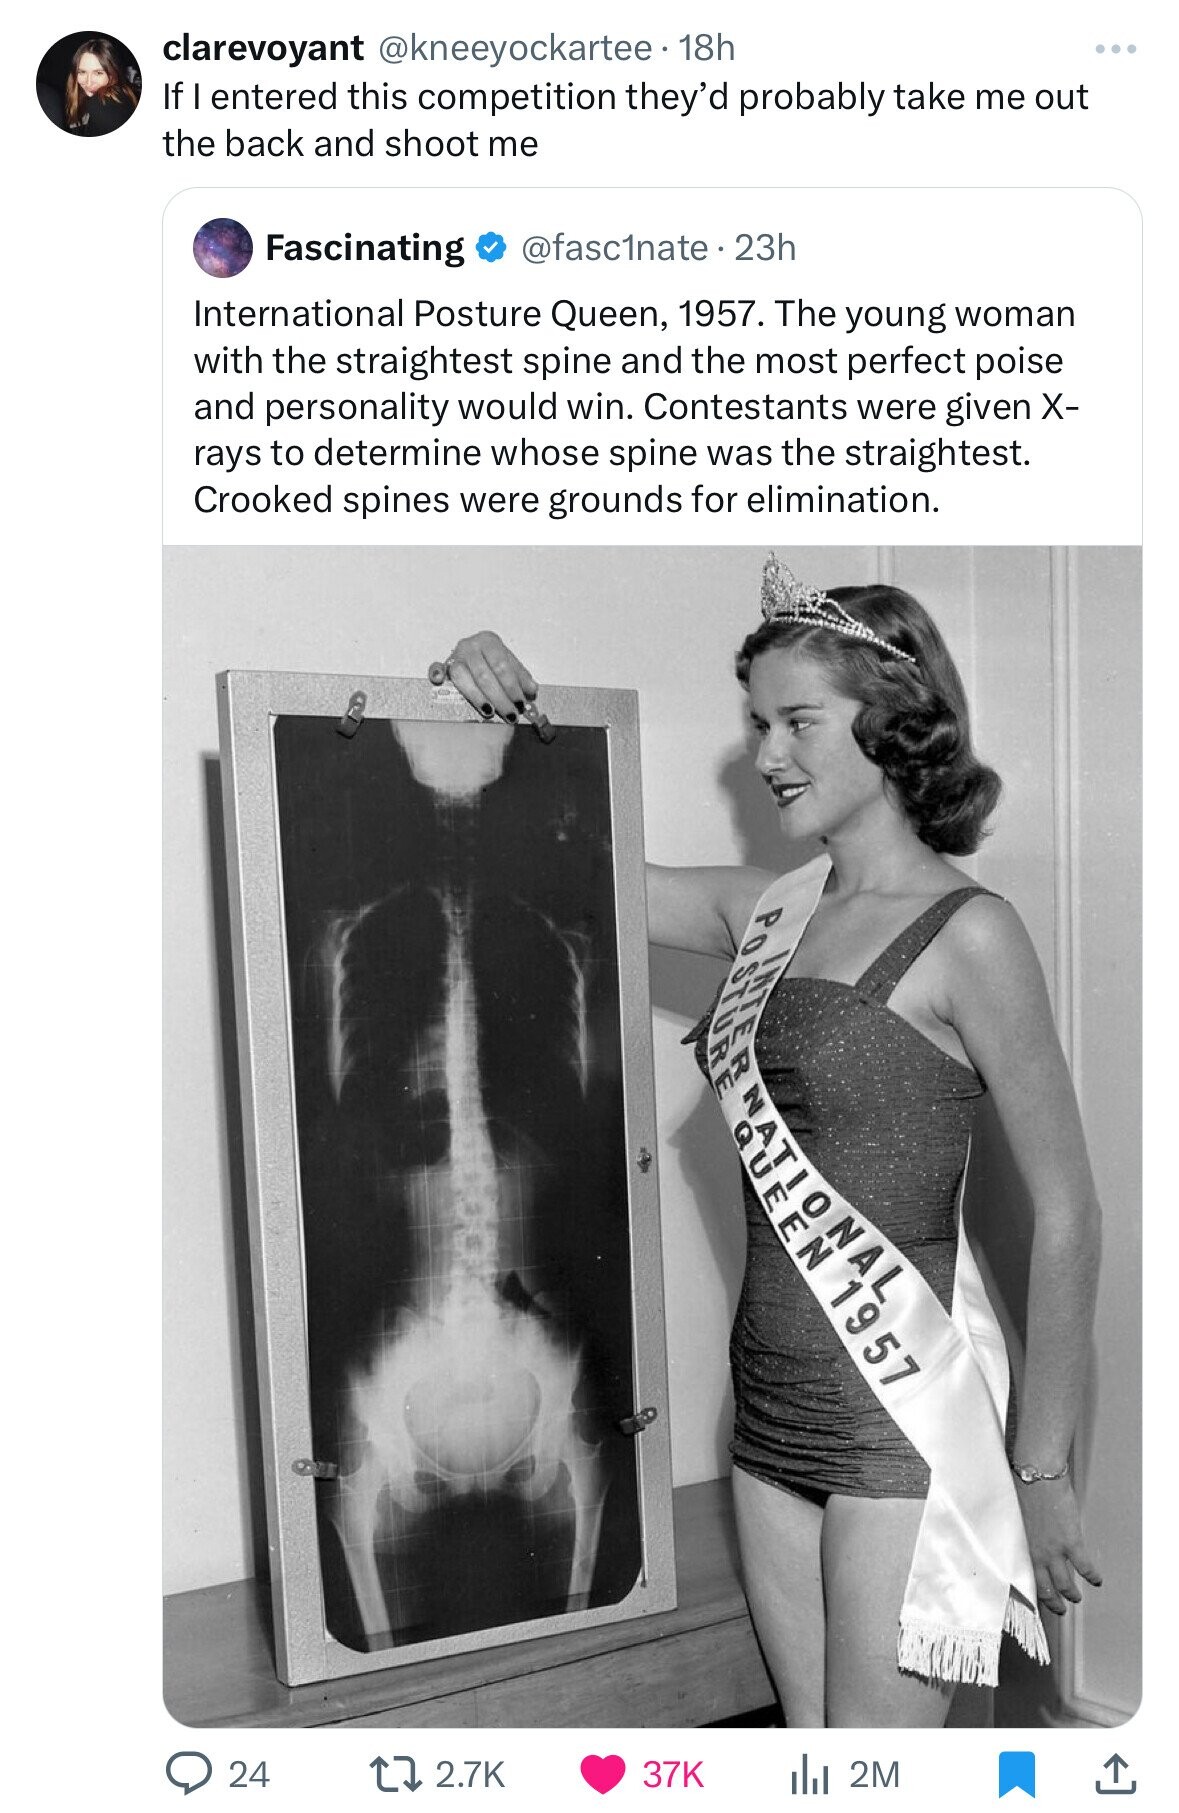 60s pageant queen - S clarevoyant 18h If I entered this competition they'd probably take me out the back and shoot me Fascinating 23h International Posture Queen, 1957. The young woman with the straightest spine and the most perfect poise and personality 